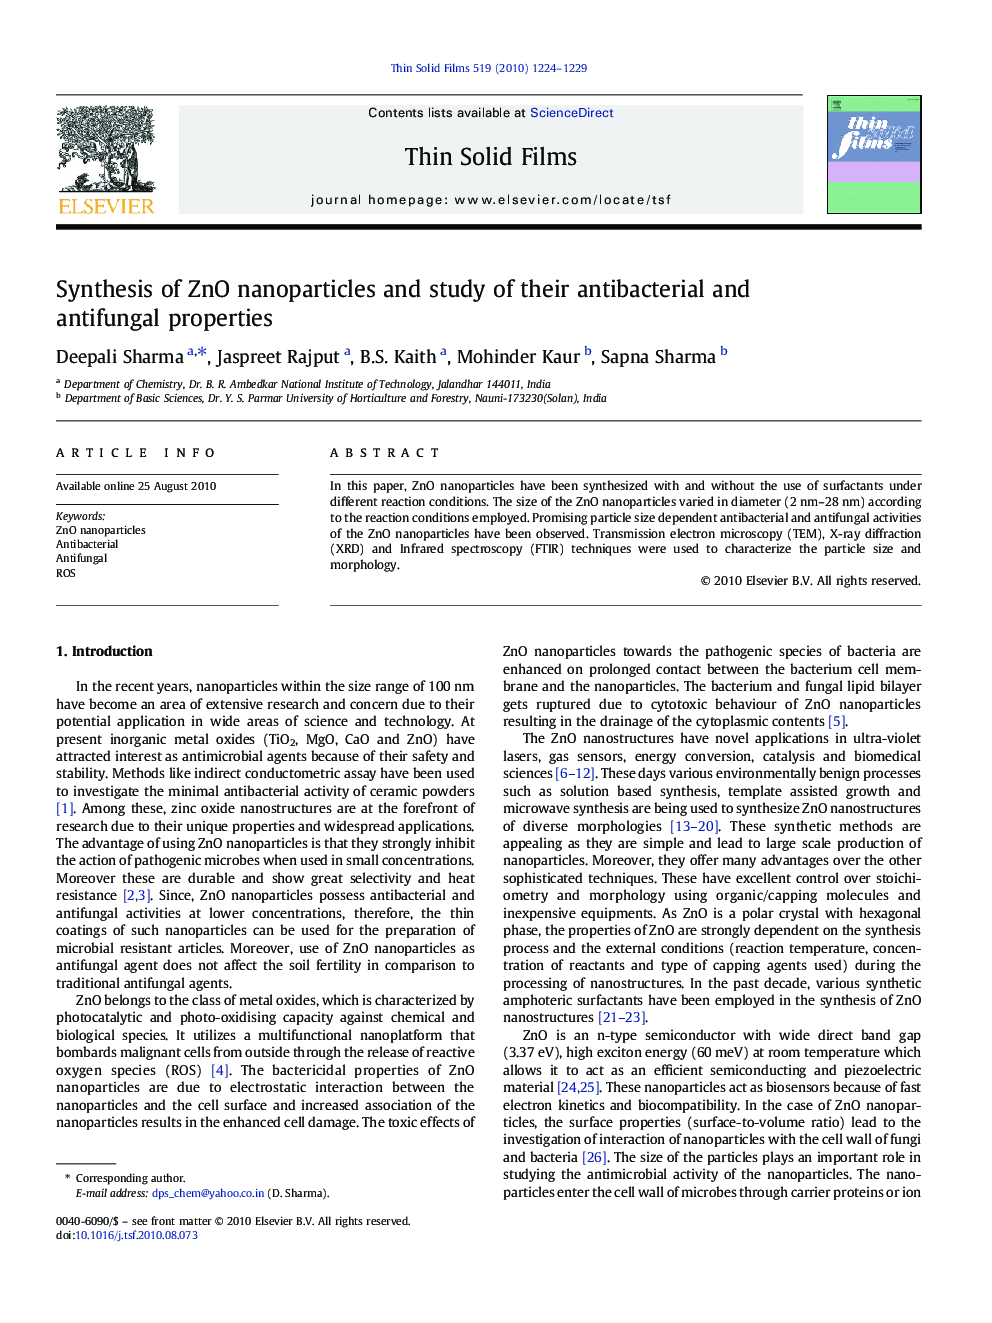 Synthesis of ZnO nanoparticles and study of their antibacterial and antifungal properties